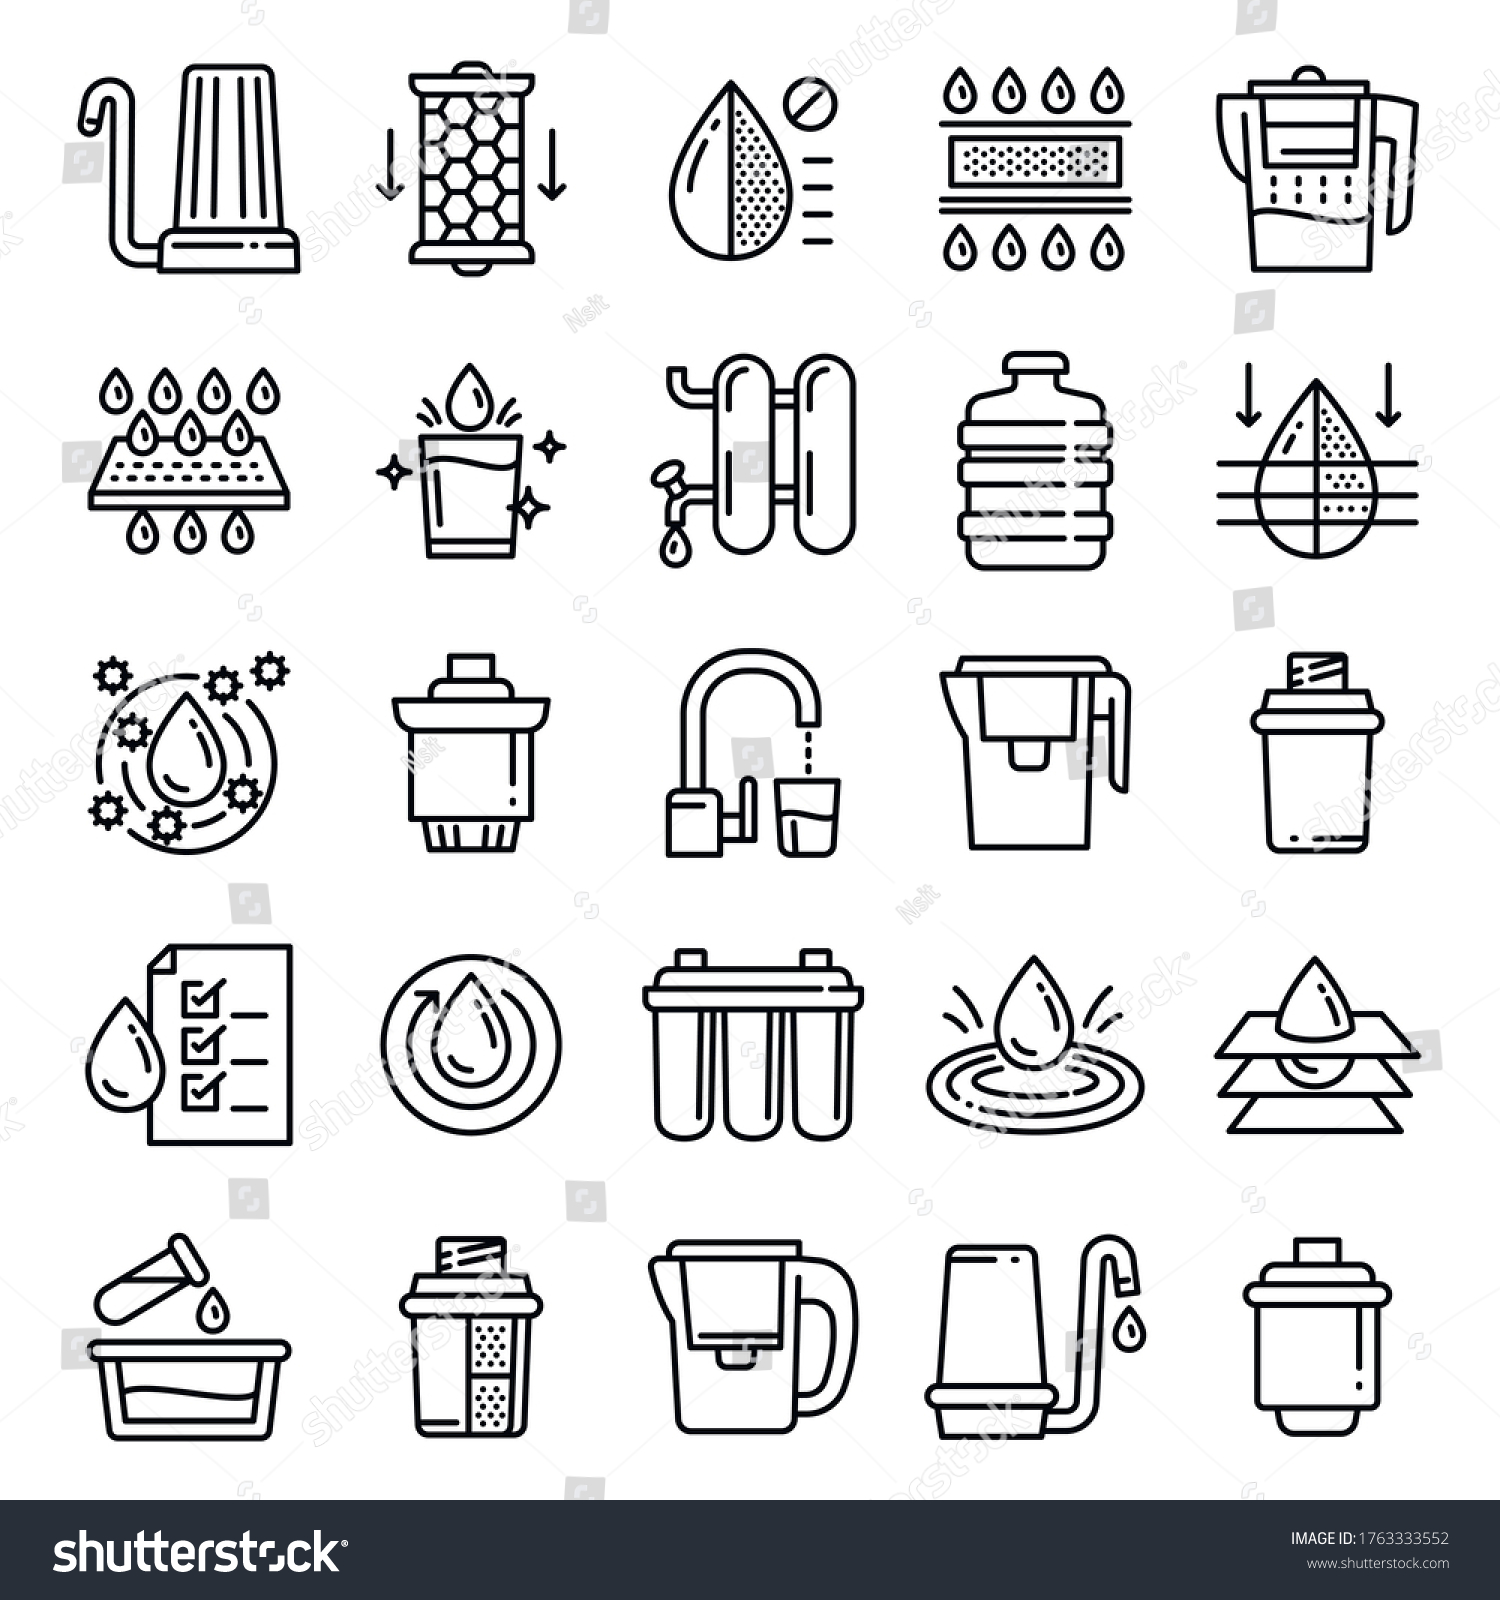 Water filter icon Images, Stock Photos & Vectors | Shutterstock